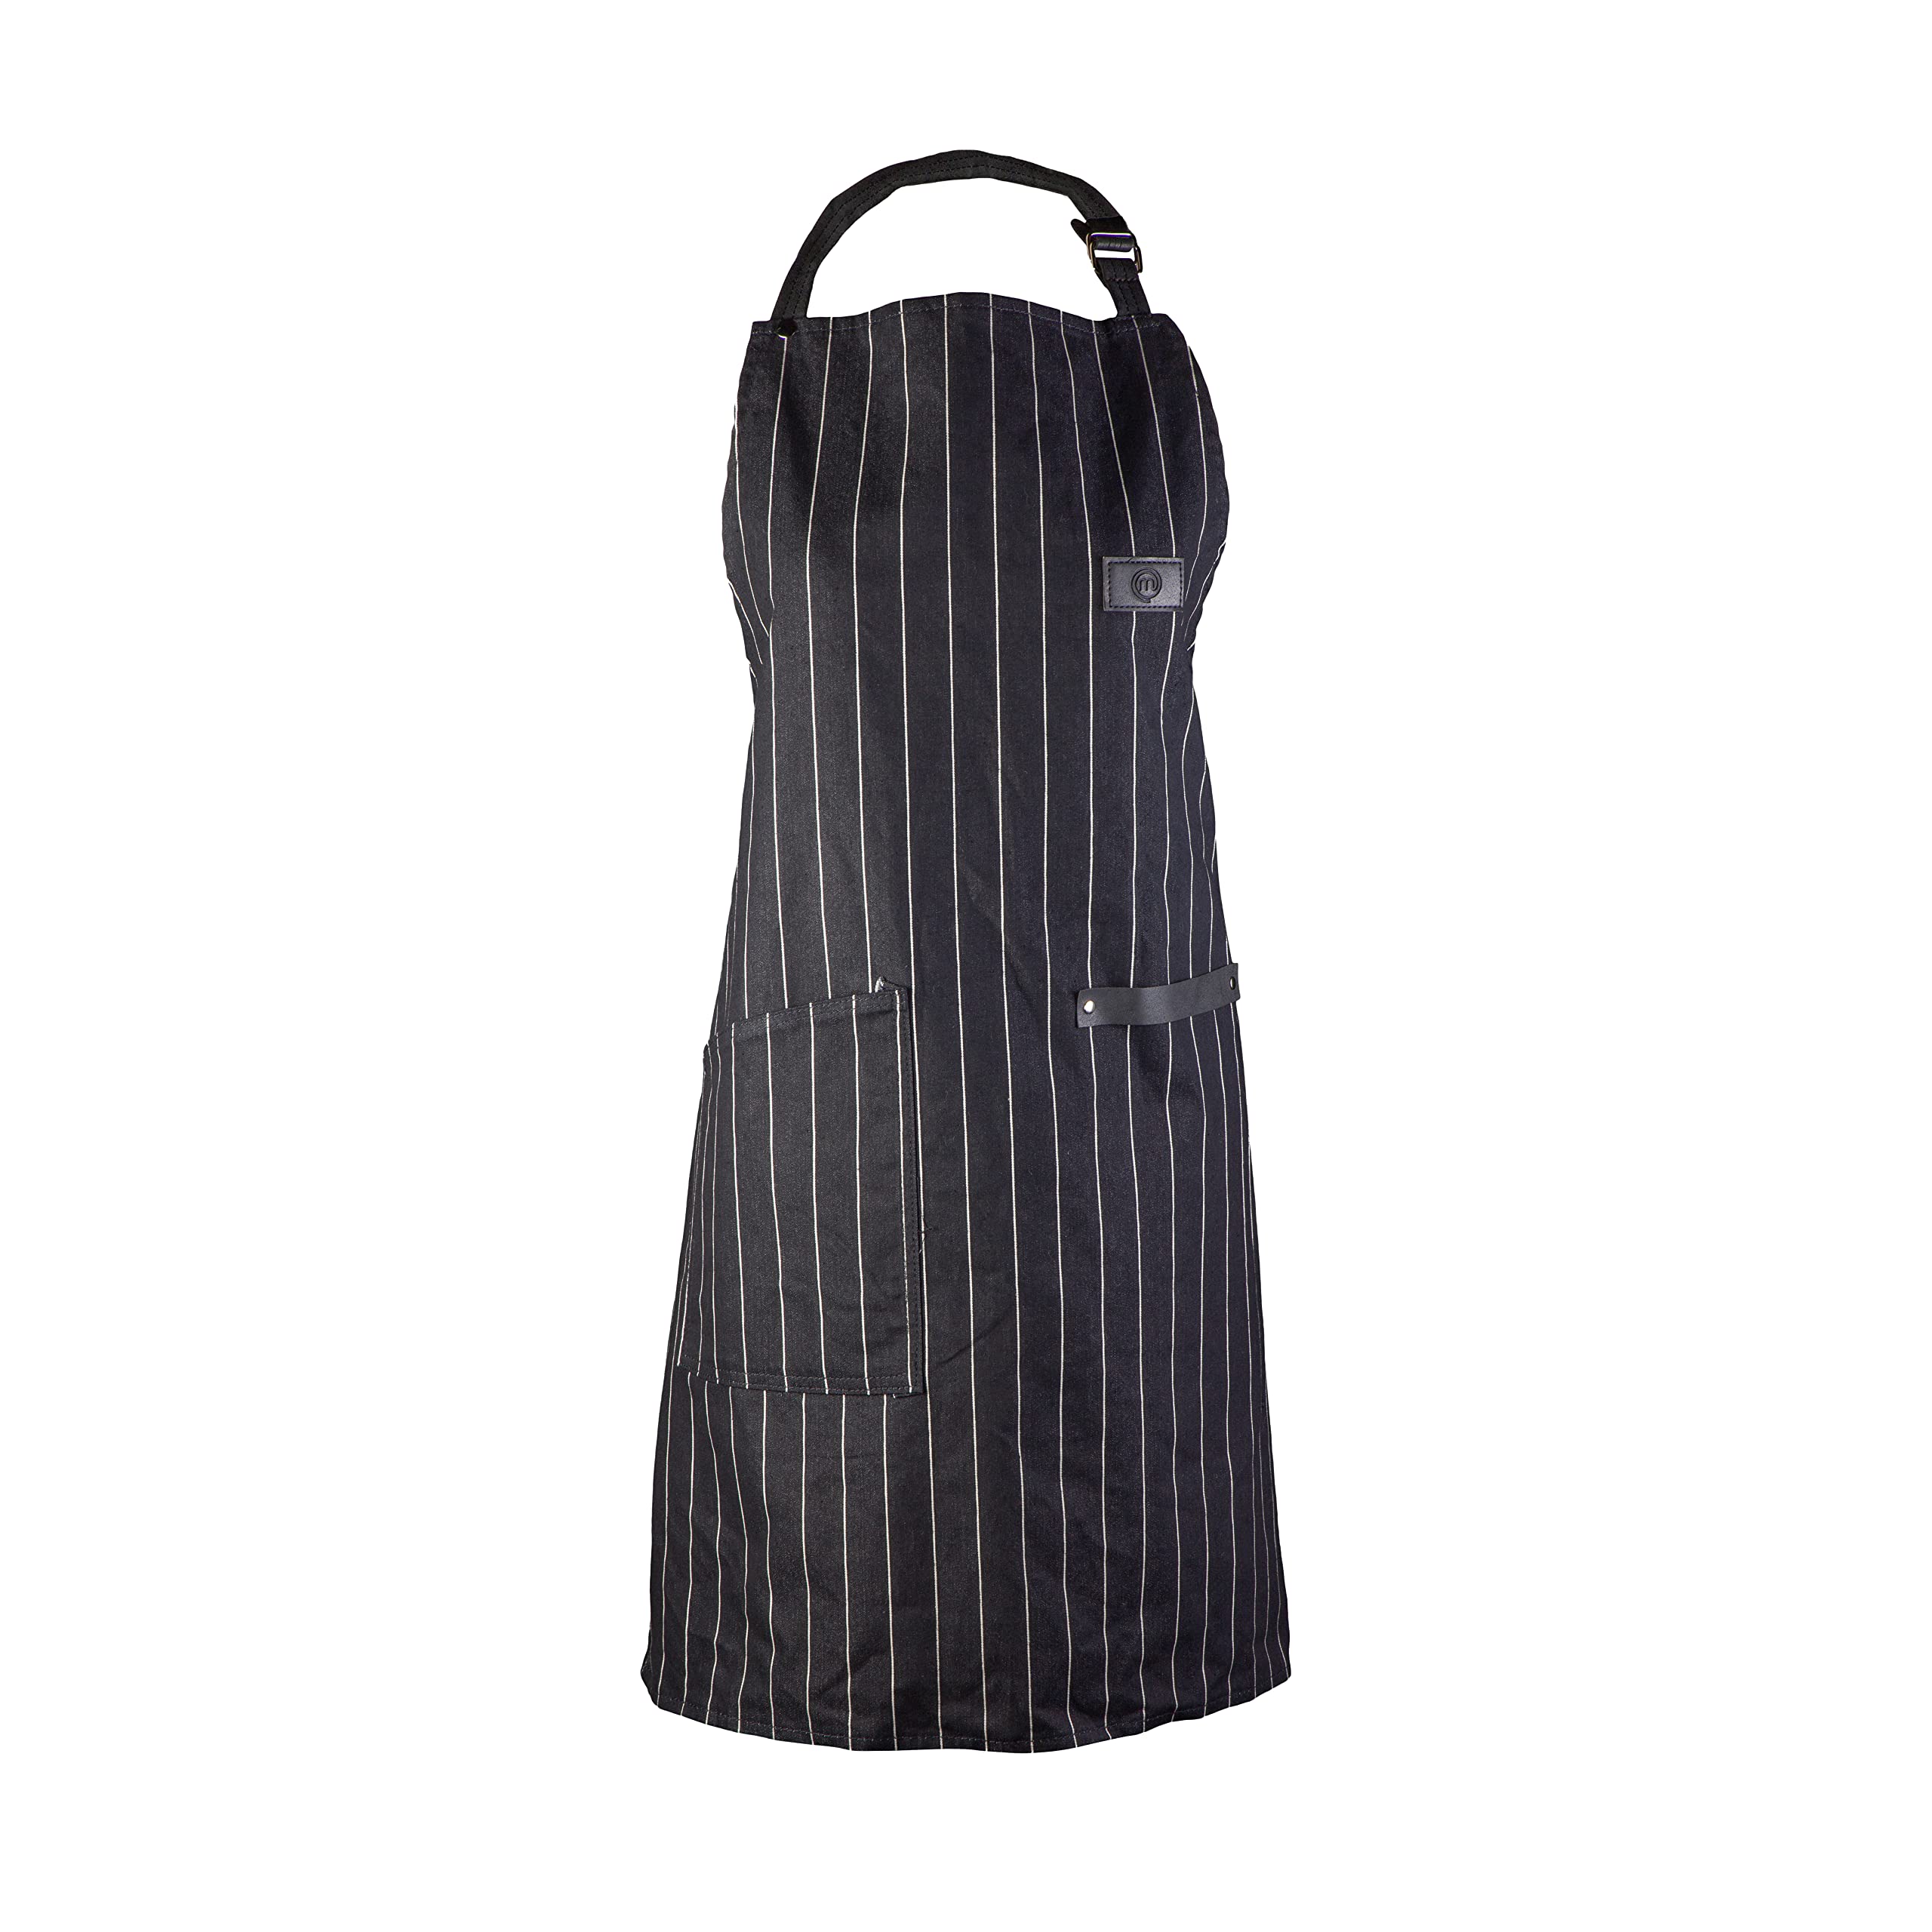 MasterChef Apron for Men & Women with Pocket, 100% Cotton with Vegan PU Leather Adjustable Strap & Official Logo, Chef's Kitchen Garment, Black with White Stripes, One Size Fits All